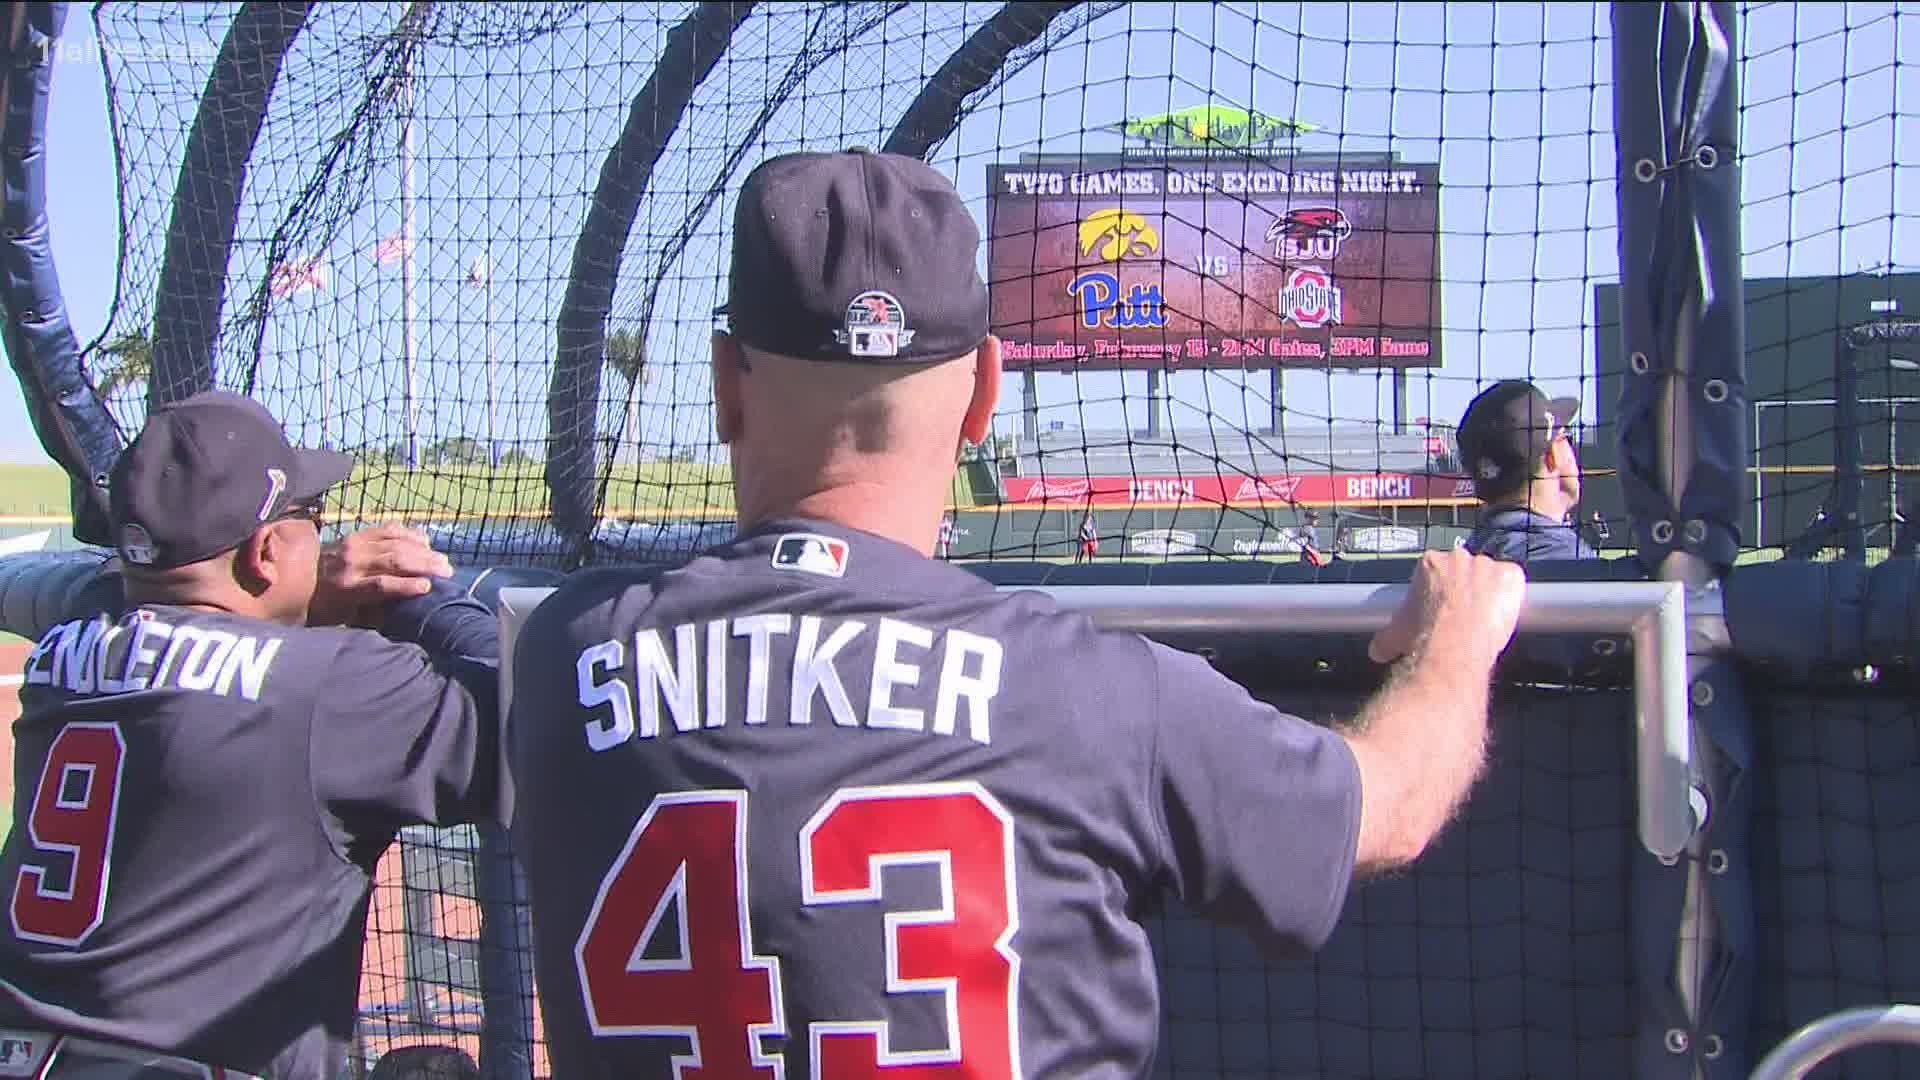 The Atlanta Braves have announced that they've signed manager Brian Snitker to a contract extension through the 2023 season with an option for the 2024 season.